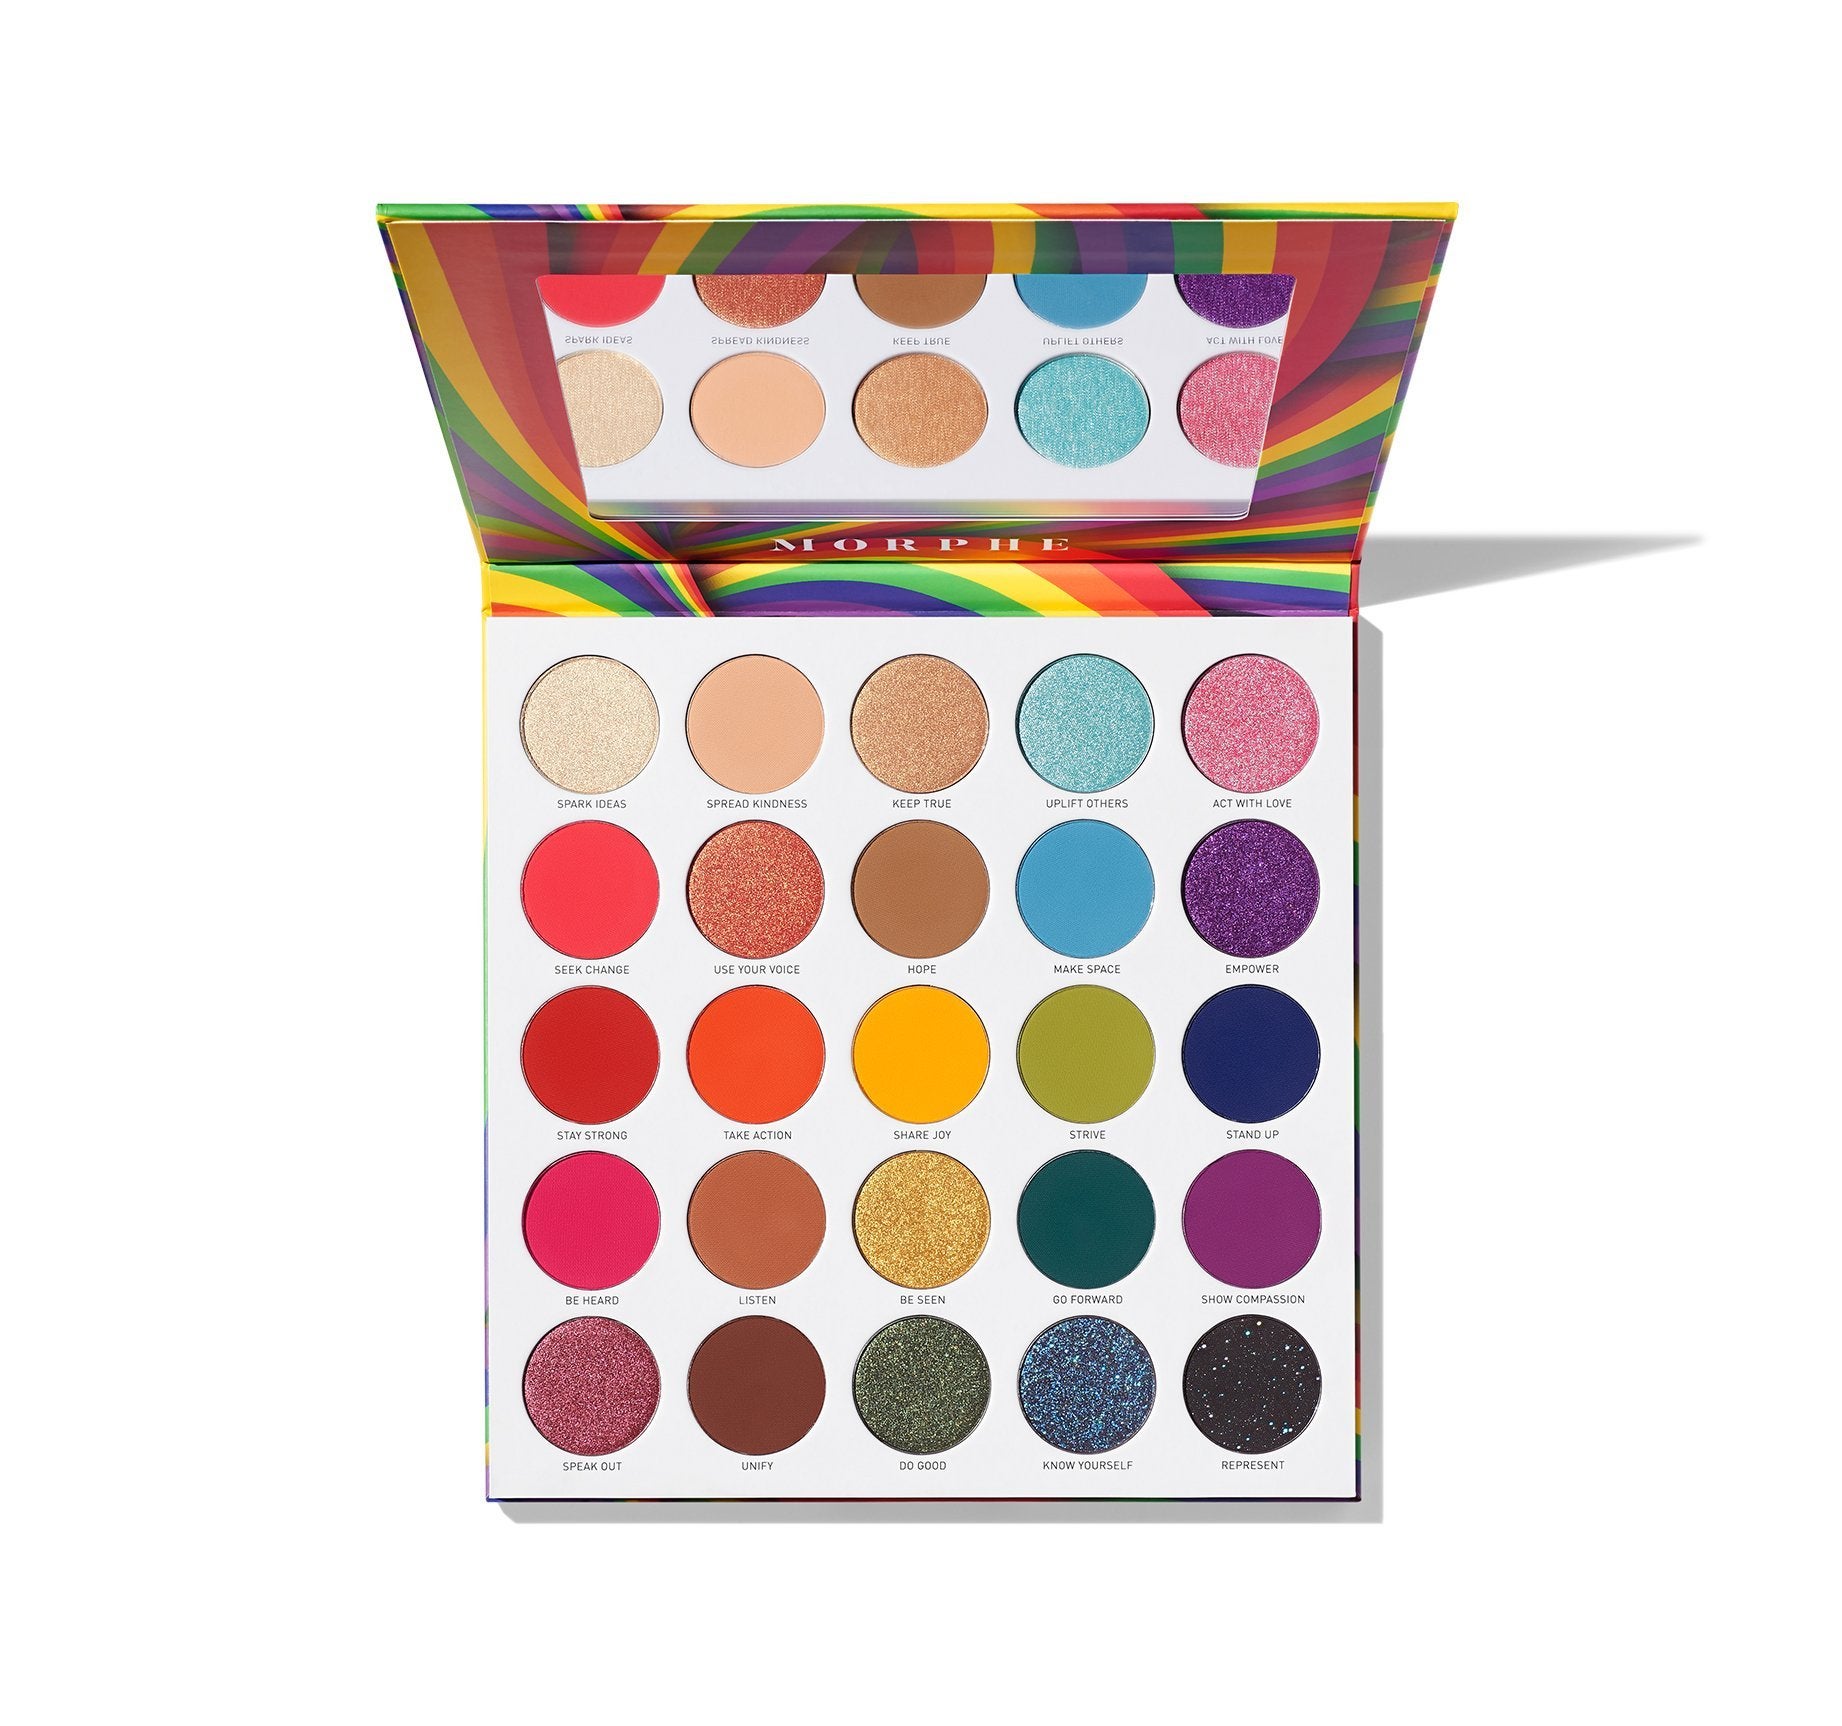 Morphe Live With Love Artistry Palette